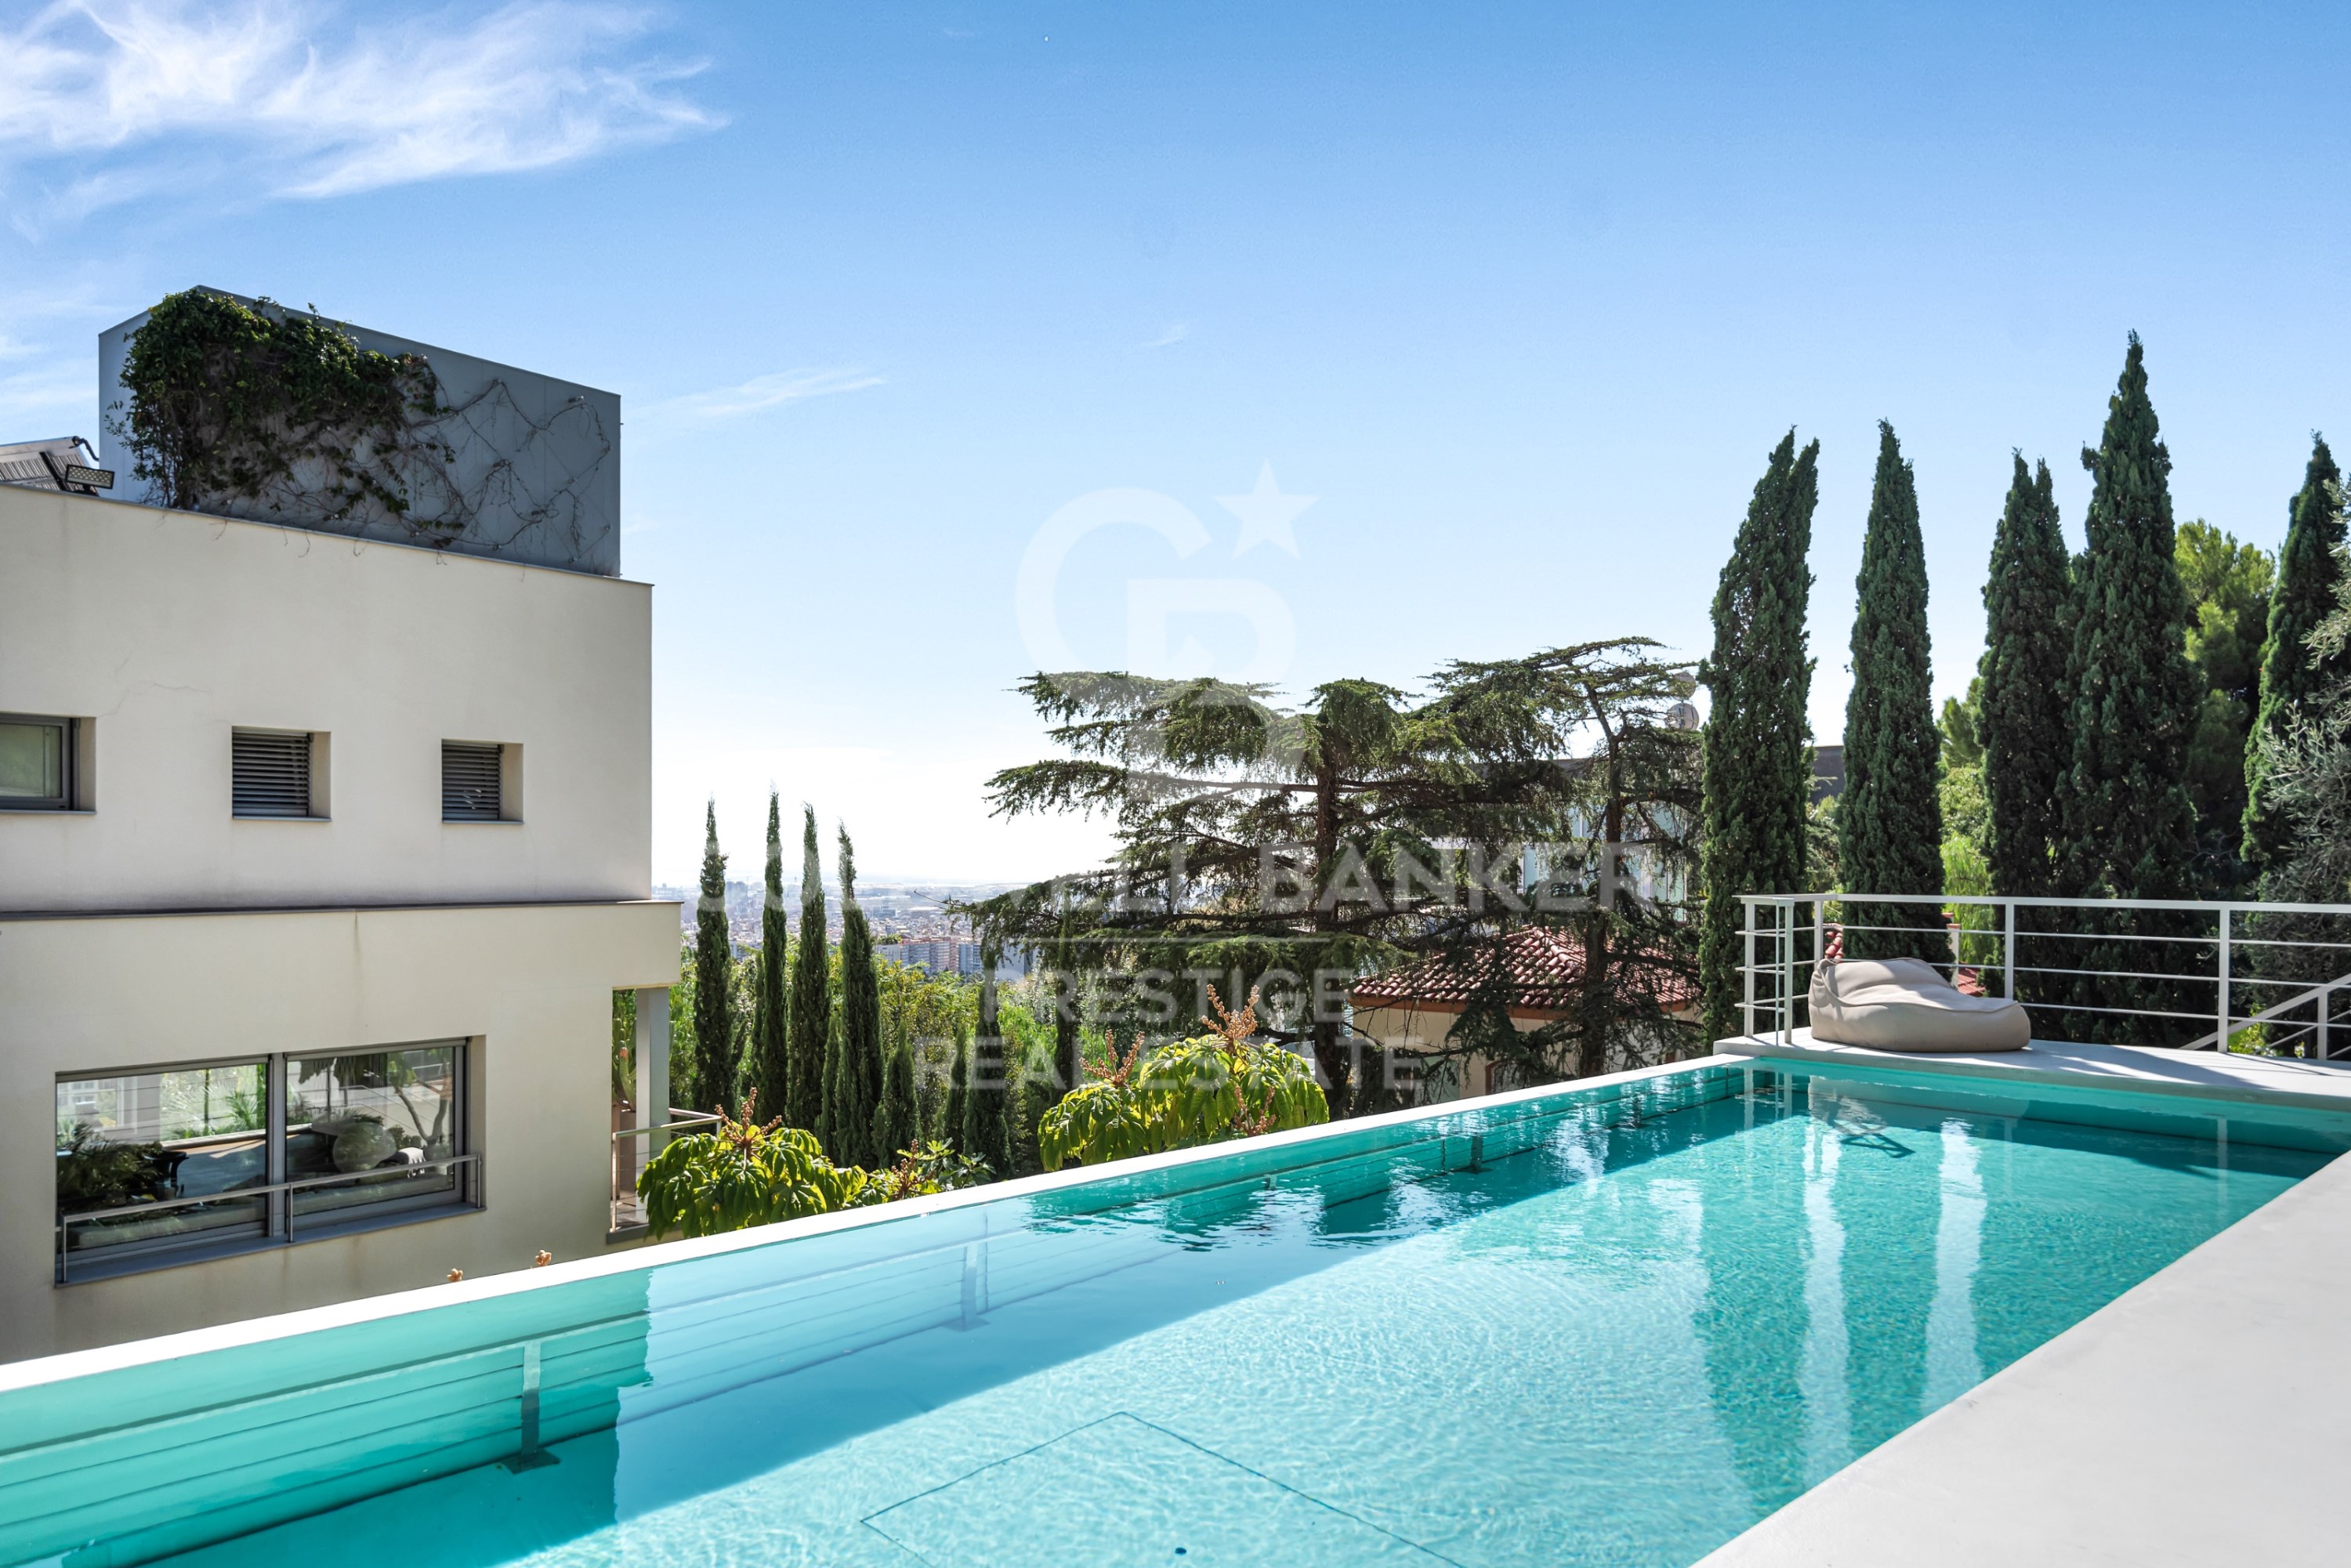 Spectacular contemporary house located in the residential neighborhood of Pedralbes